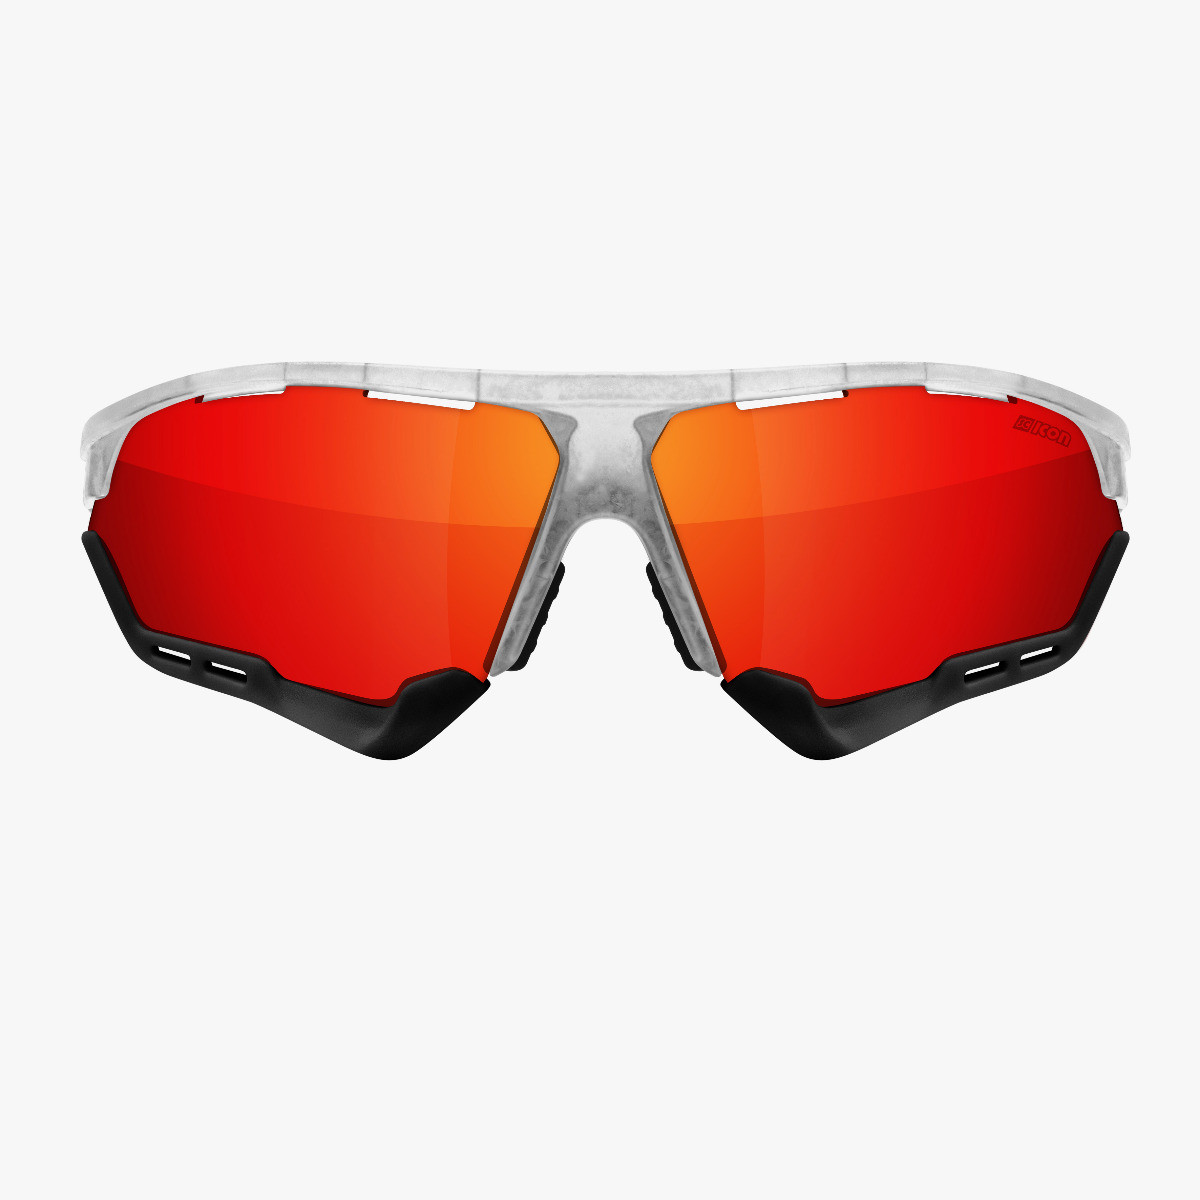 Scicon Sports | Aerocomfort Sport Cycling Performance Sunglasses - Frozen White / Red - EY15060503
